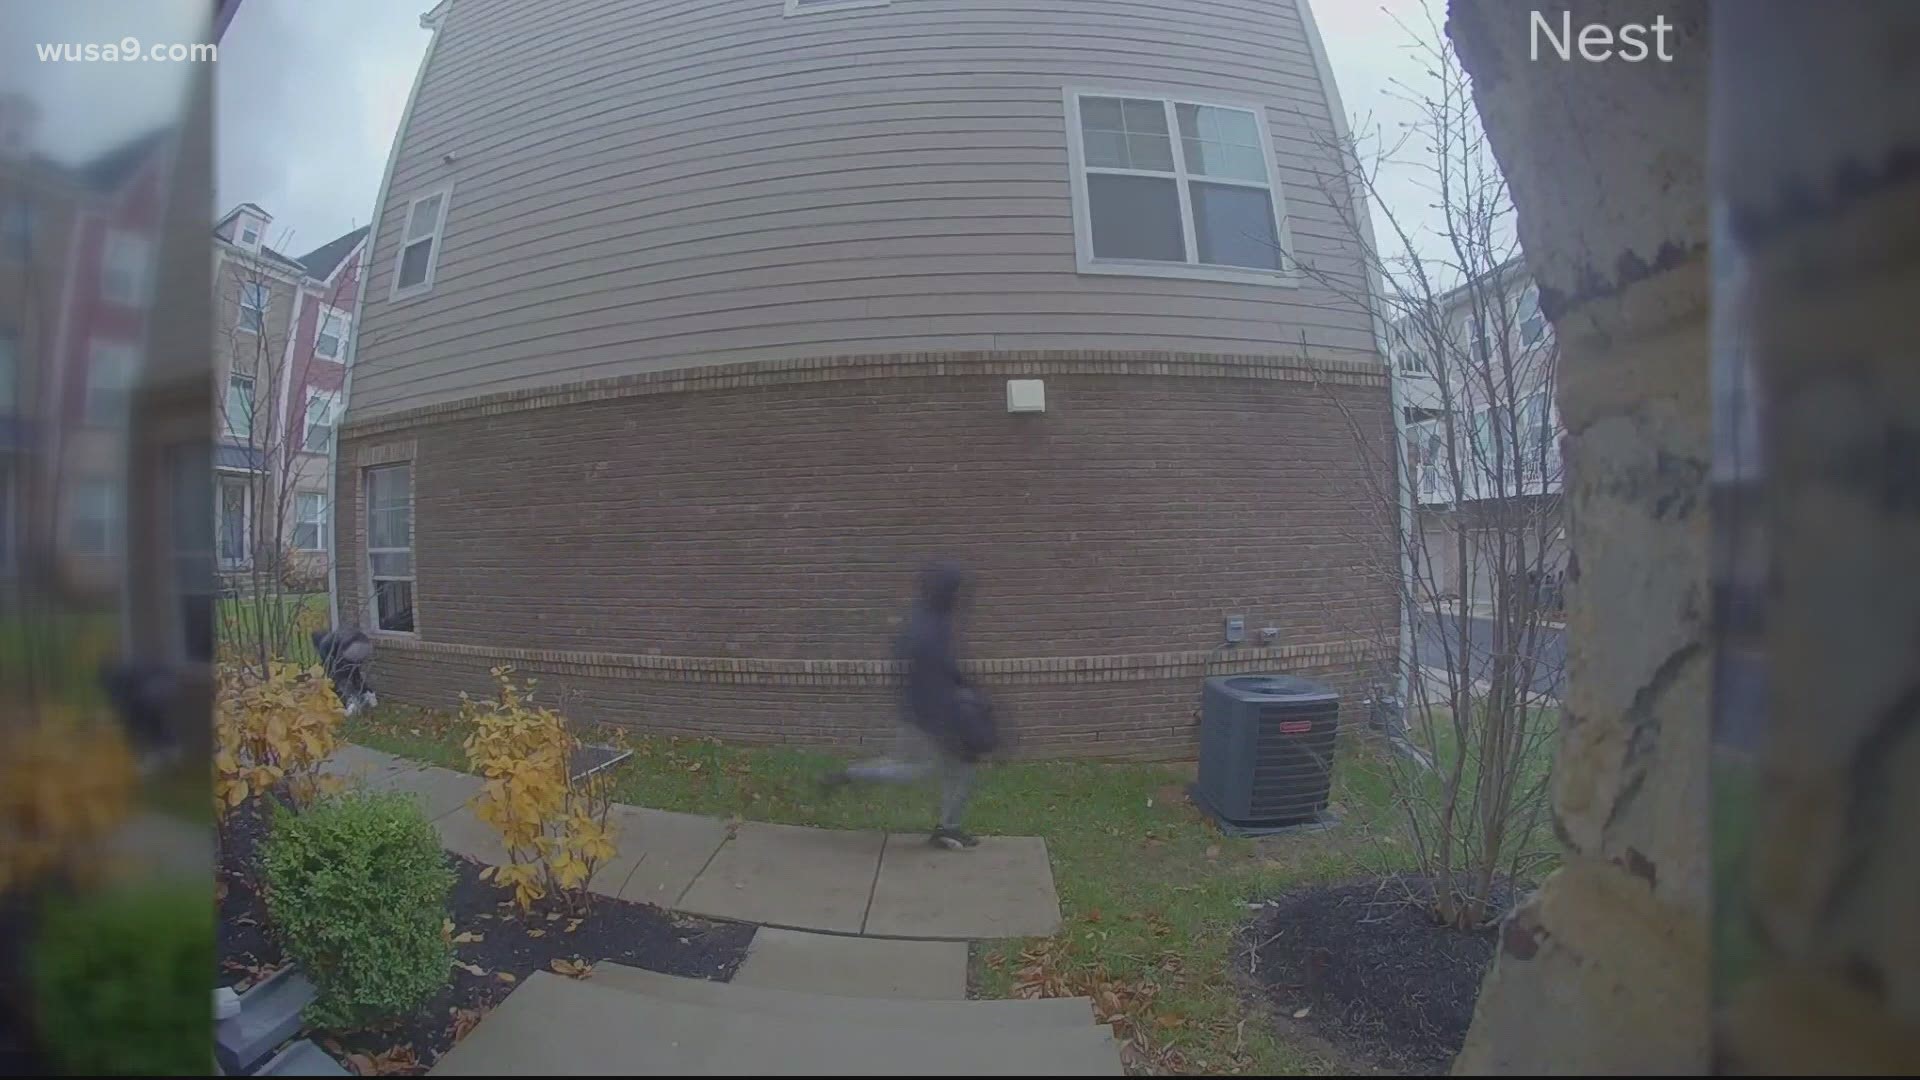 A recent national study revealed 50% of Americans report being the victims of package theft in the past year.